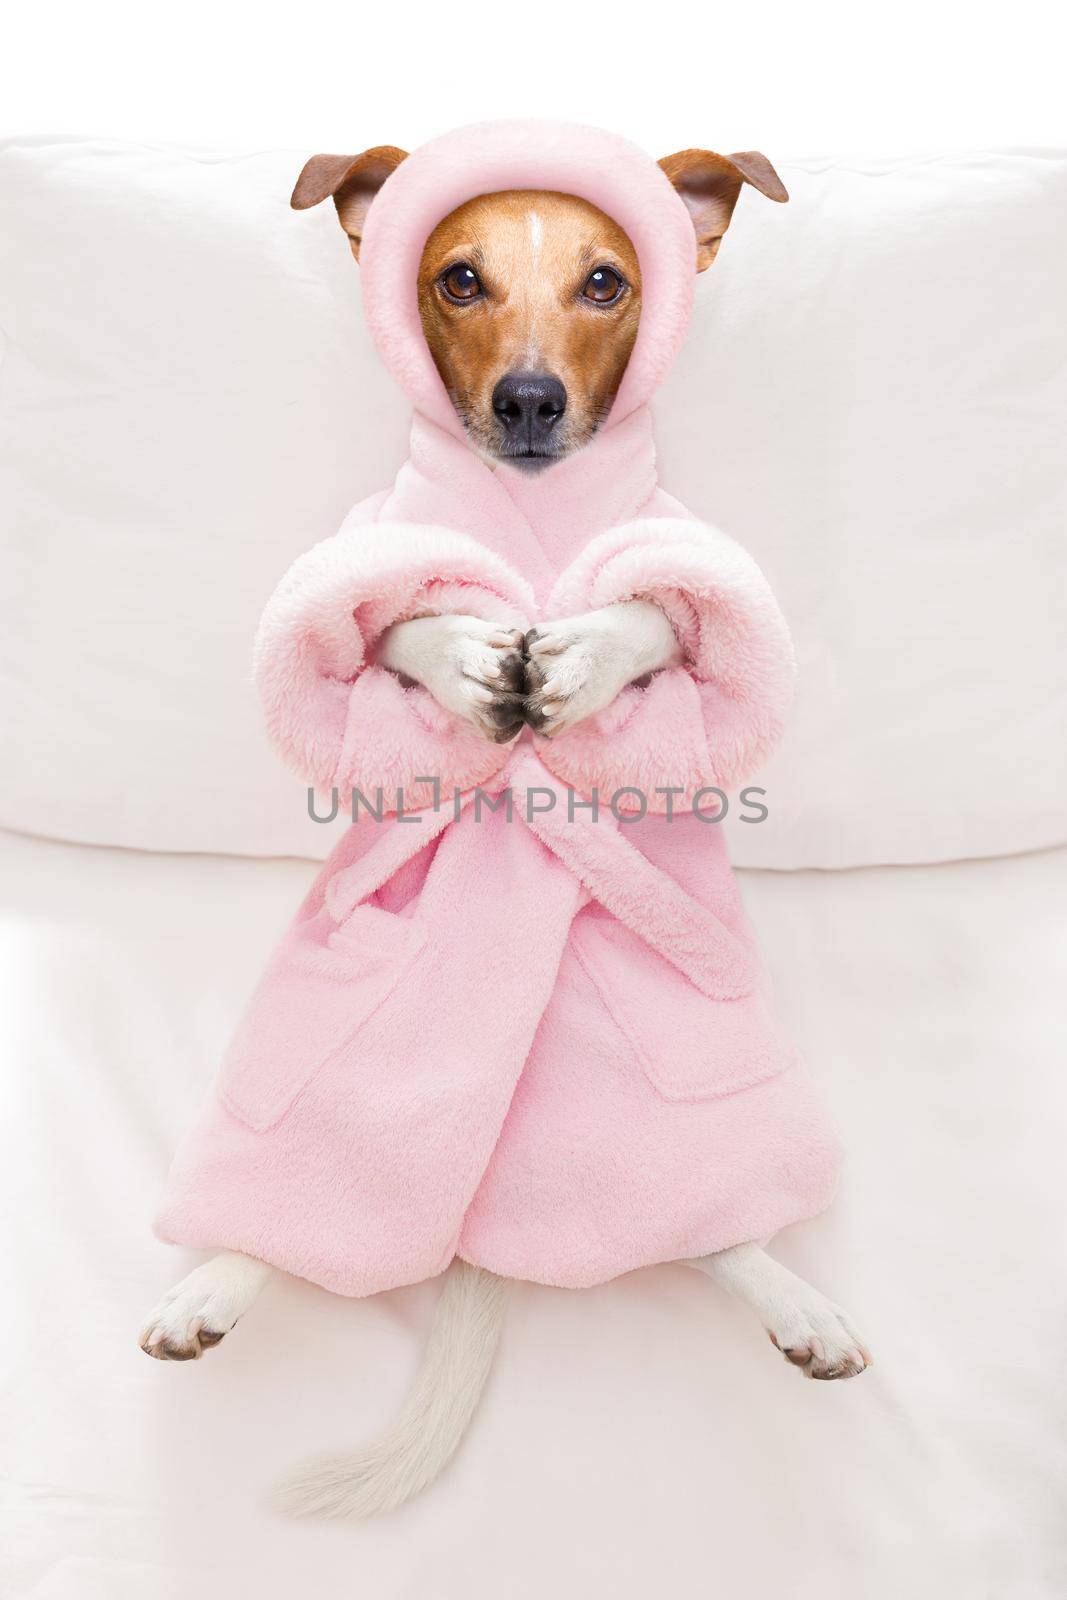 cool funny  jack russell  dog resting and relaxing in   spa wellness salon center ,wearing a  bathrobe